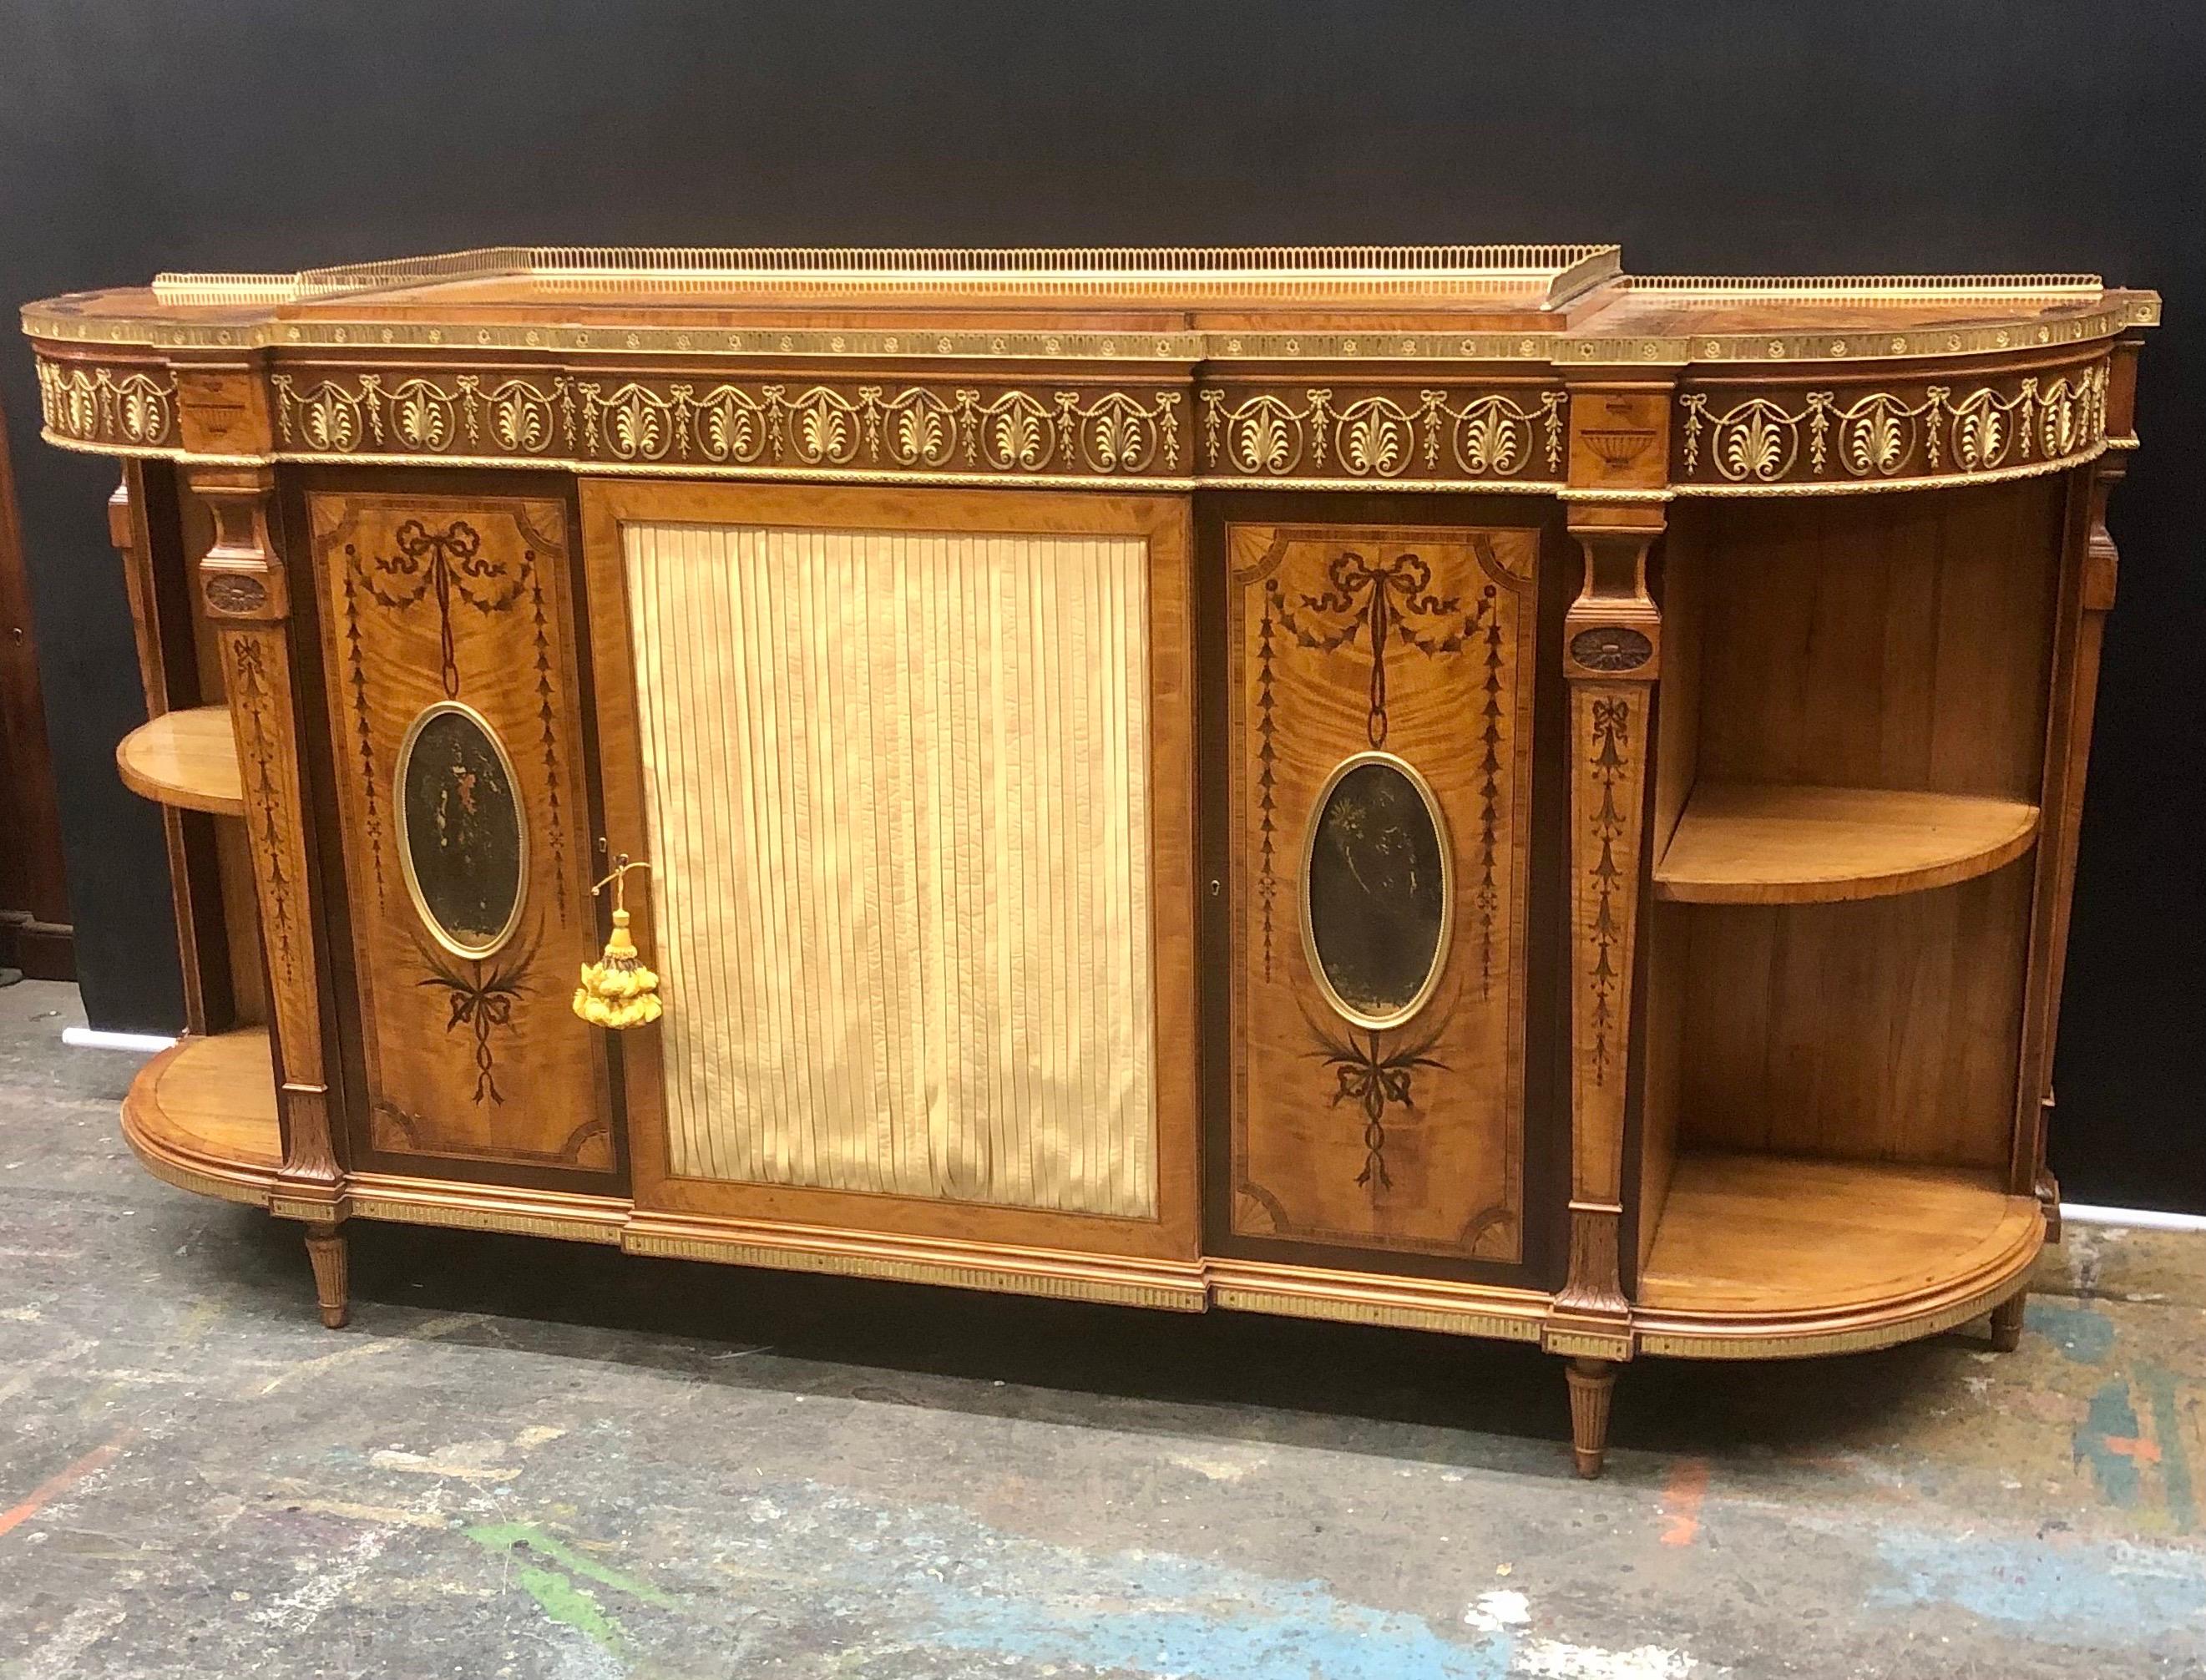 The Royal furniture-makers, Wright and Mansfield of London were the Cabinet Makers for this rare Adam Style Satinwood Ormolu Mounted Credenza or Side Cabinet. This Regal Satinwood Cabinet has an elevated center stage top with four Fan Cartouche